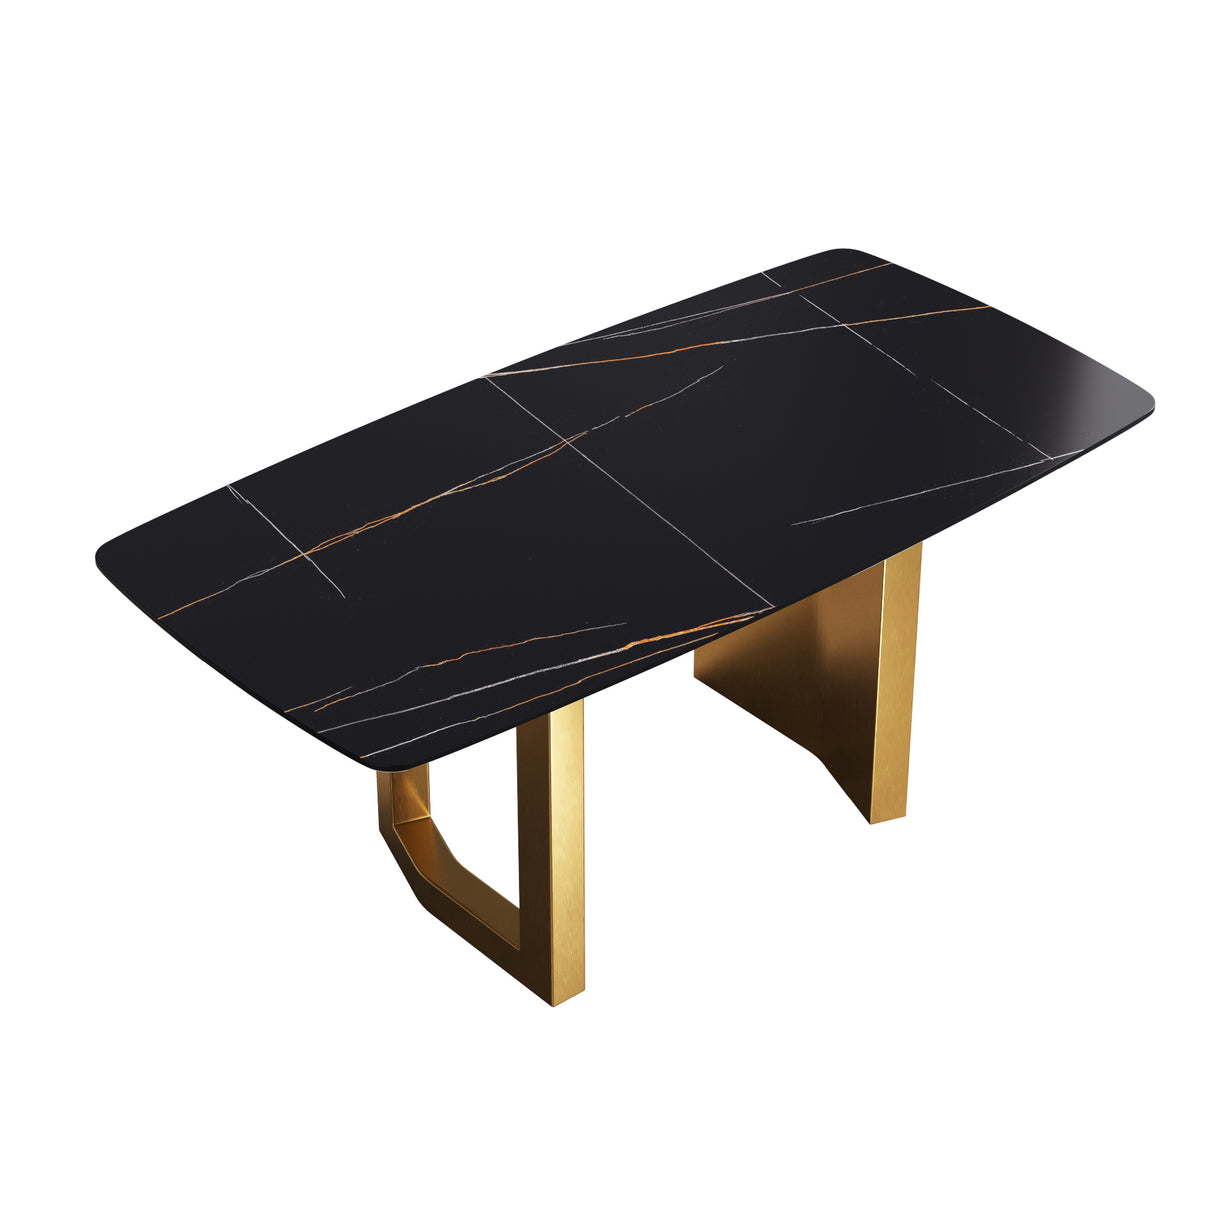 70.87"Modern artificial stone black curved golden metal leg dining table-can accommodate 6-8 people - Home Elegance USA